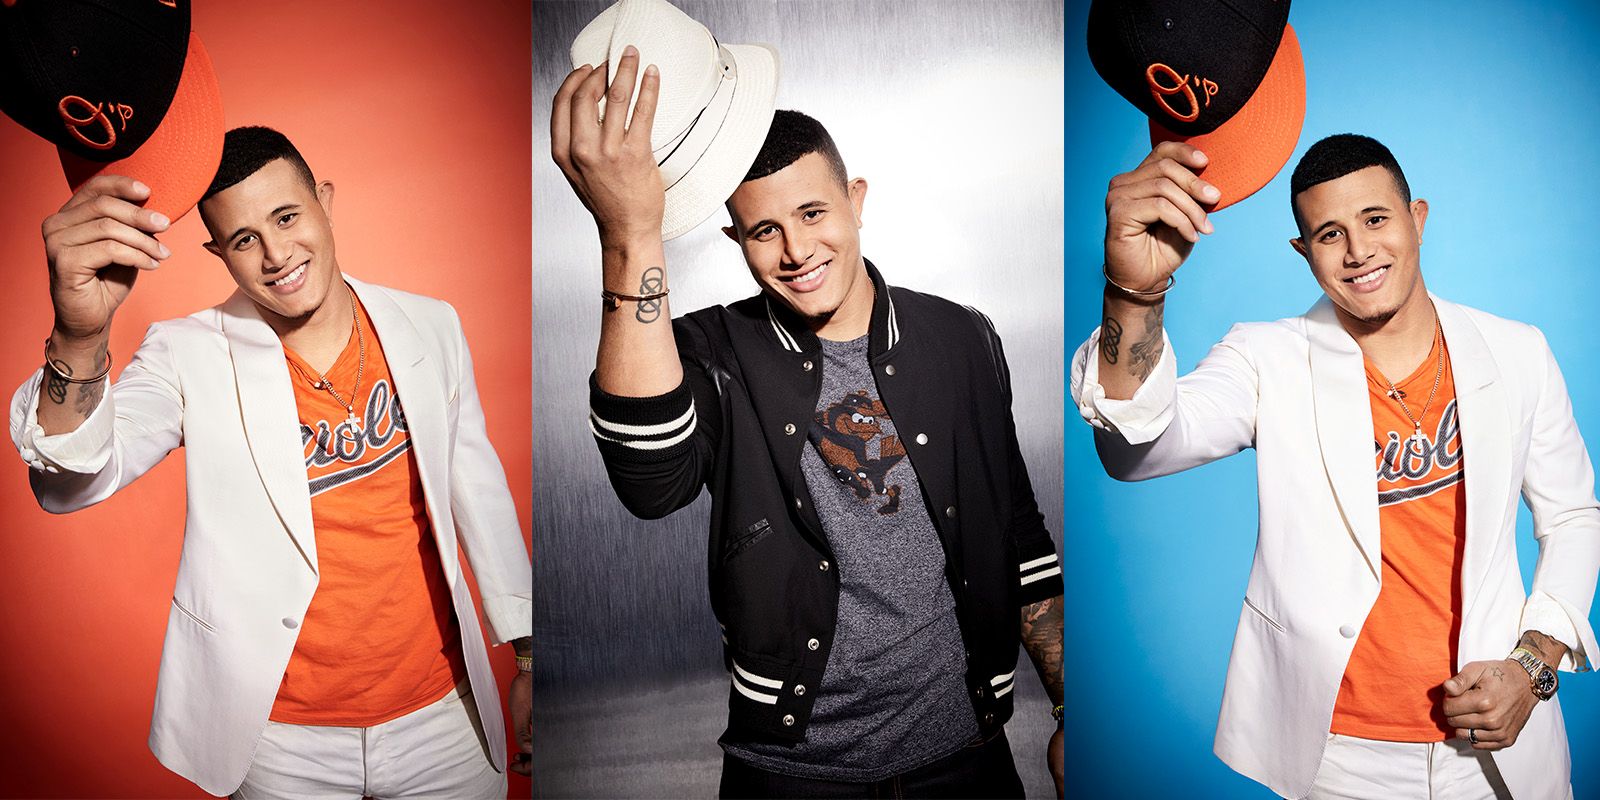 Baltimore Orioles Manny Machado is the face of MLB's new identity